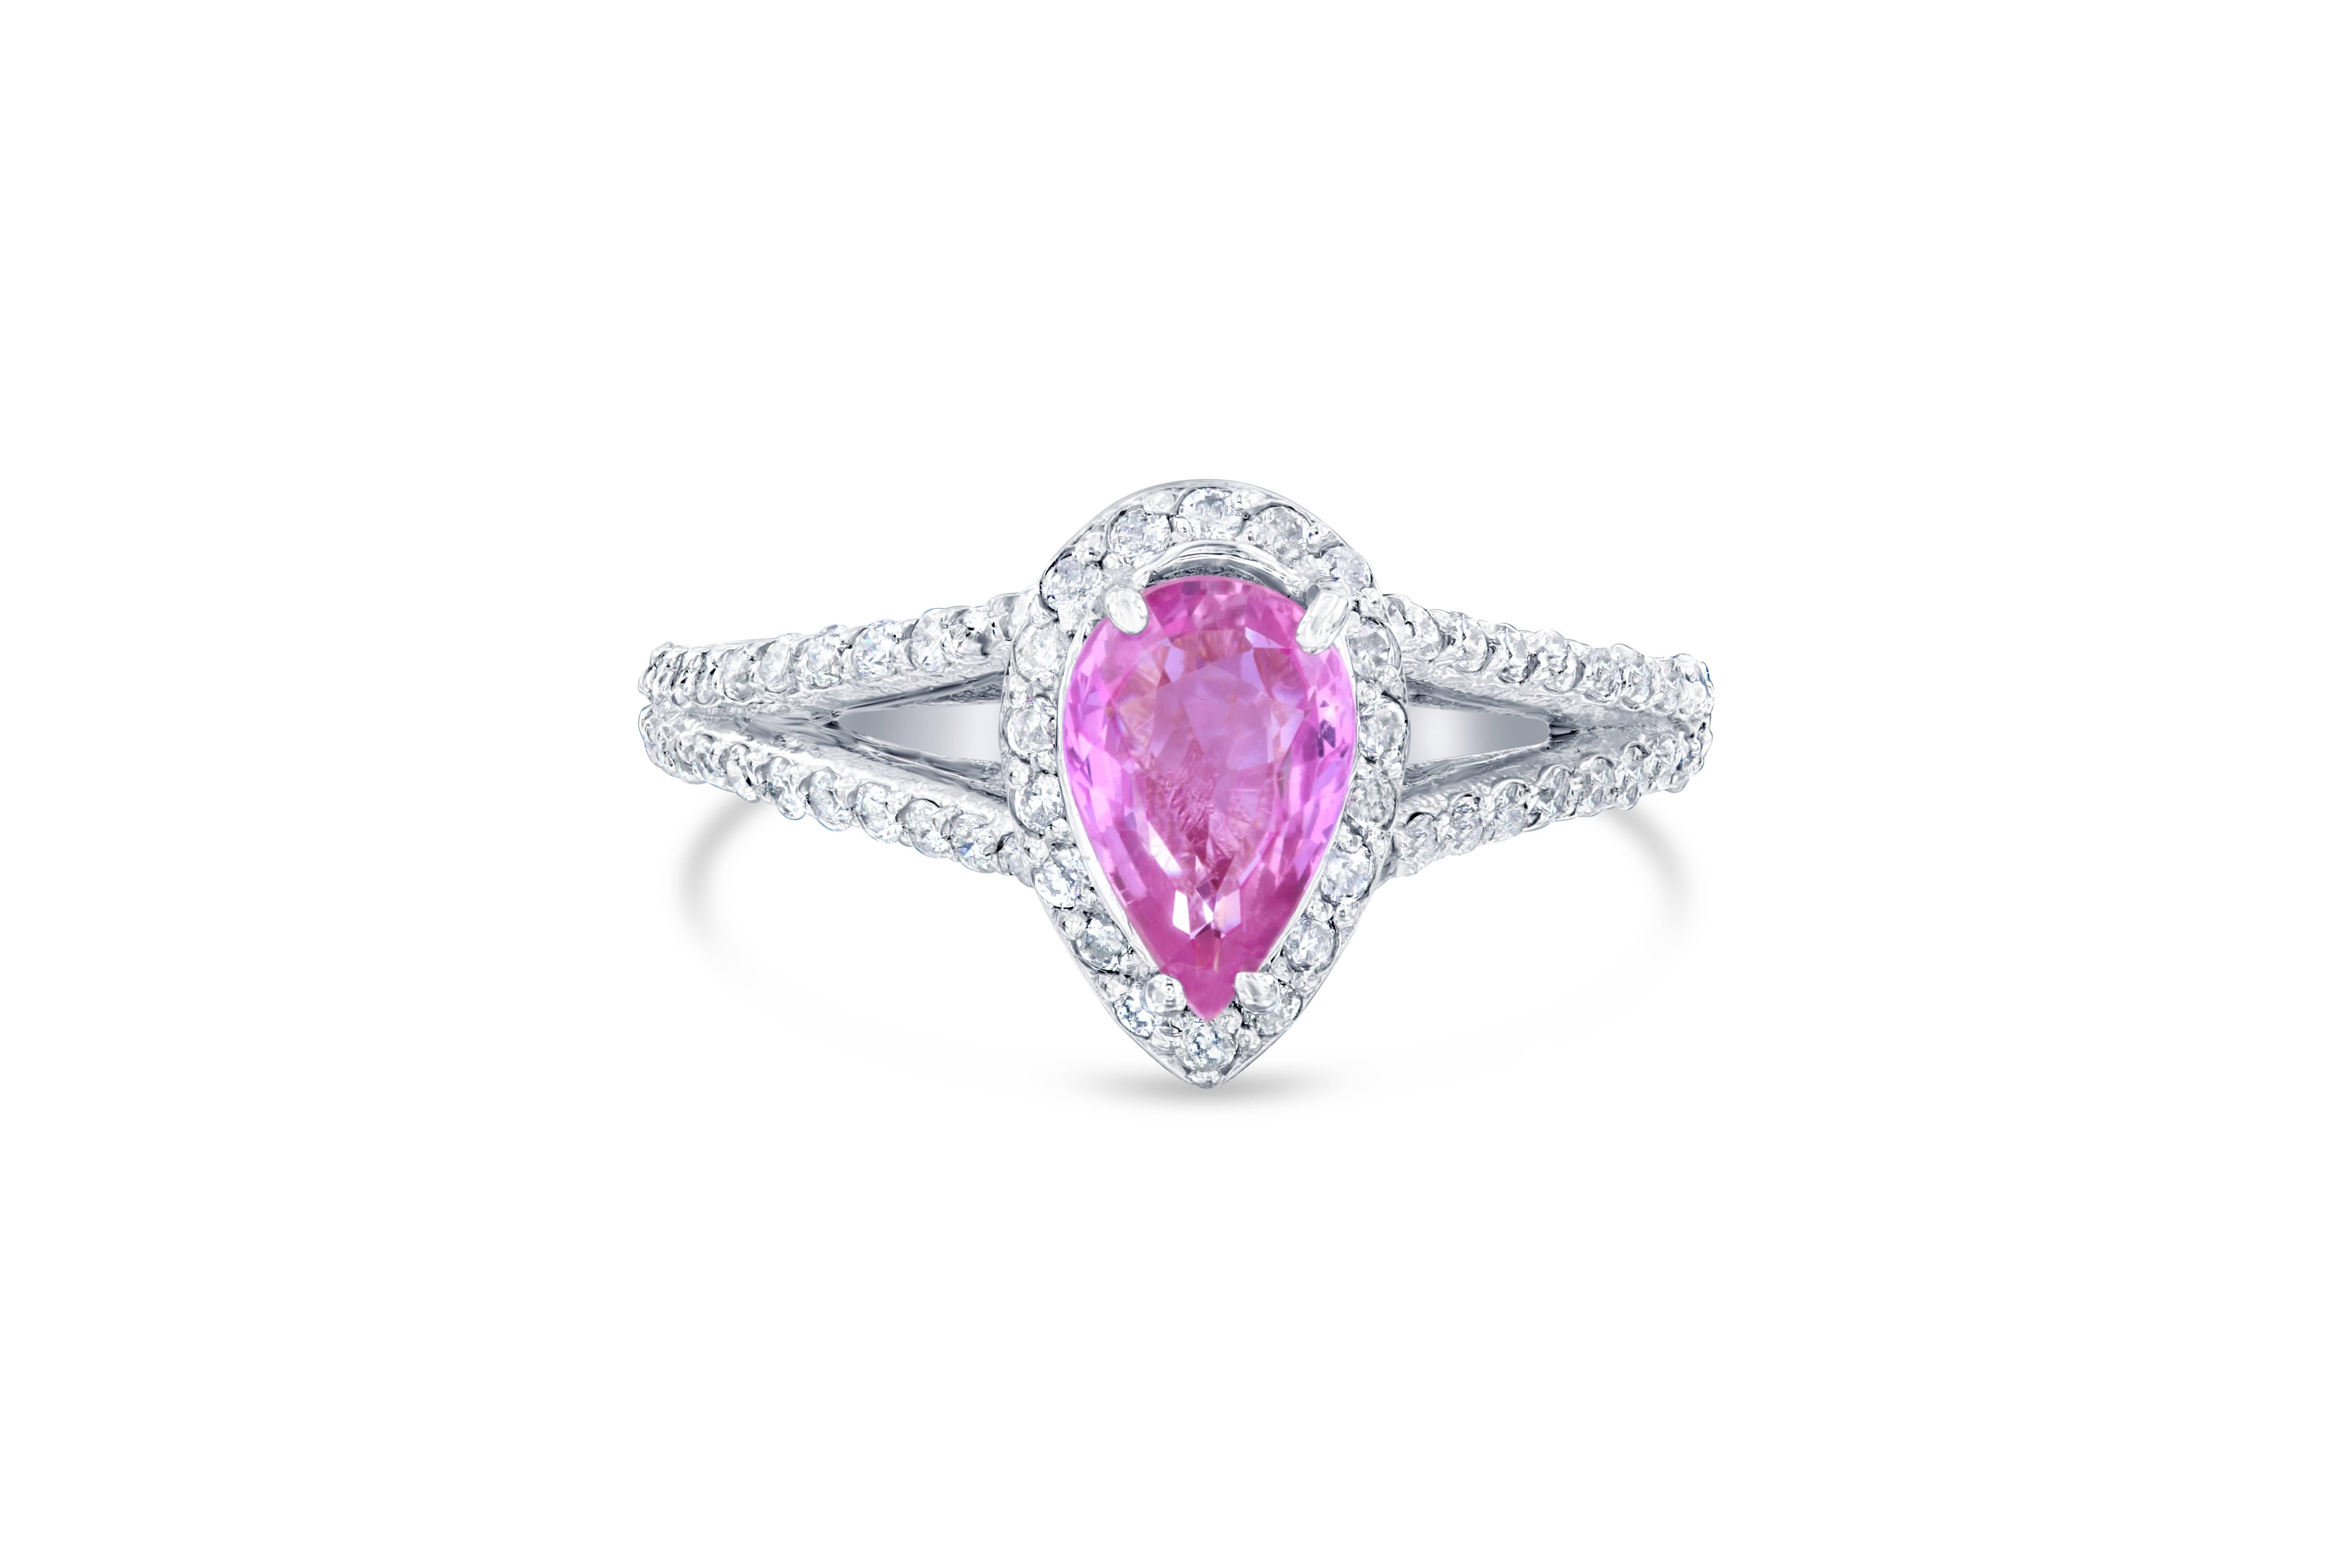 Gorgeous Pink Sapphire Diamond Ring with a beautiful setting! Can be a very unique Engagement Ring or Cocktail Ring! 
The center Pear Cut Pink Sapphire is 1.11 Carats surrounded by a halo of 40 Round Cut Diamonds weighing 0.50 Carats. The ring has a